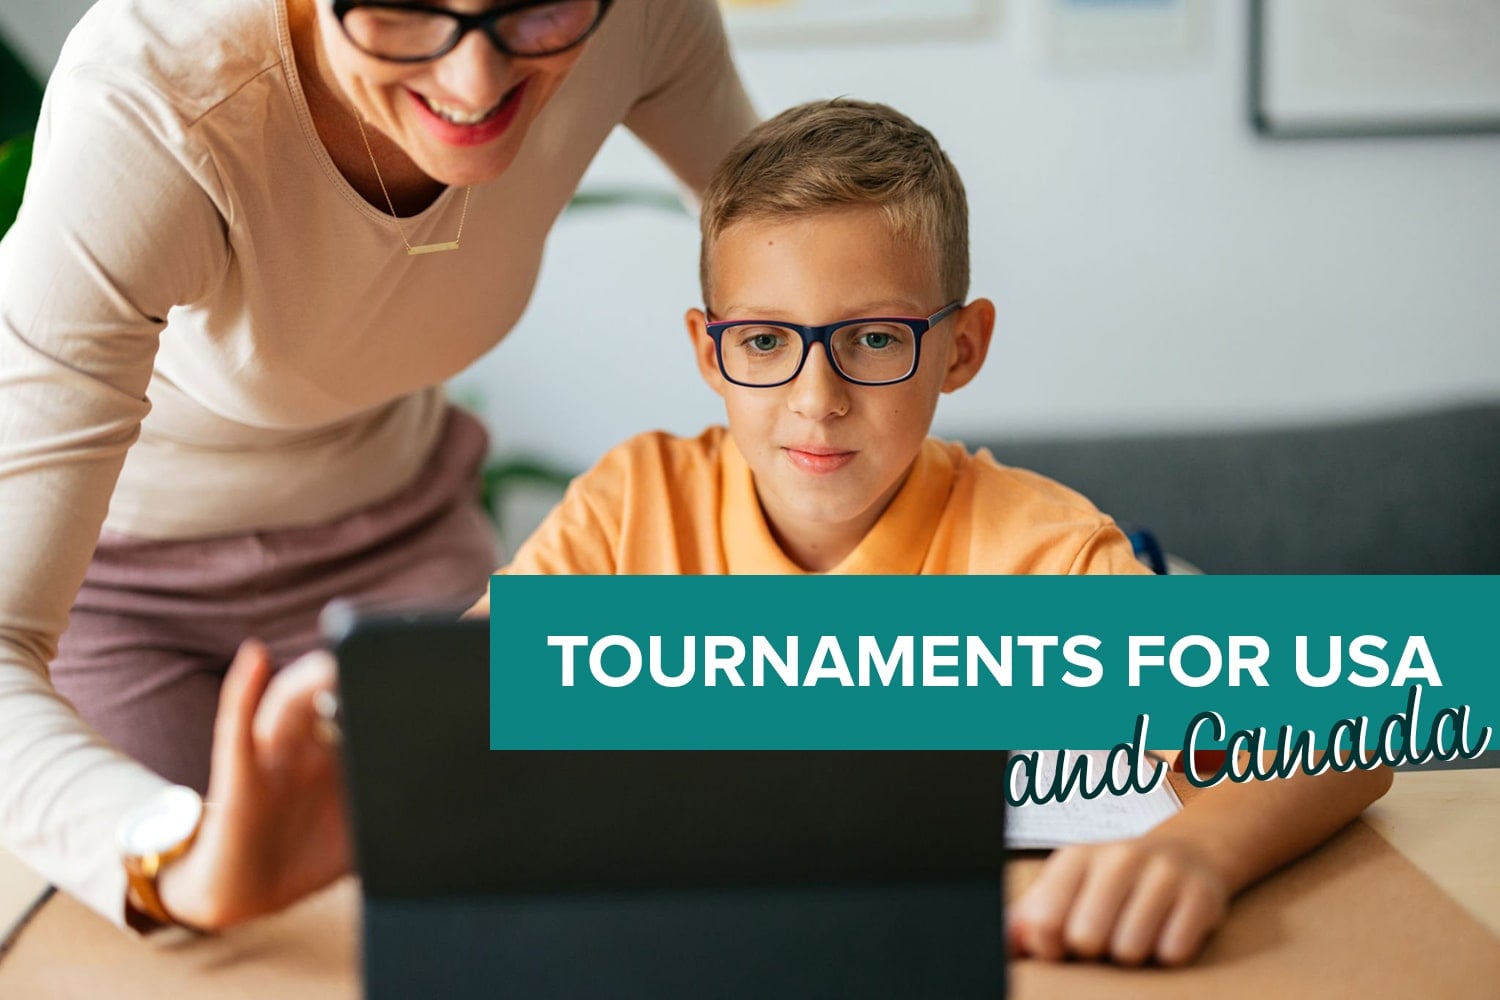 TOURNAMENTS FOR USA AND CANADA ON LICHESS